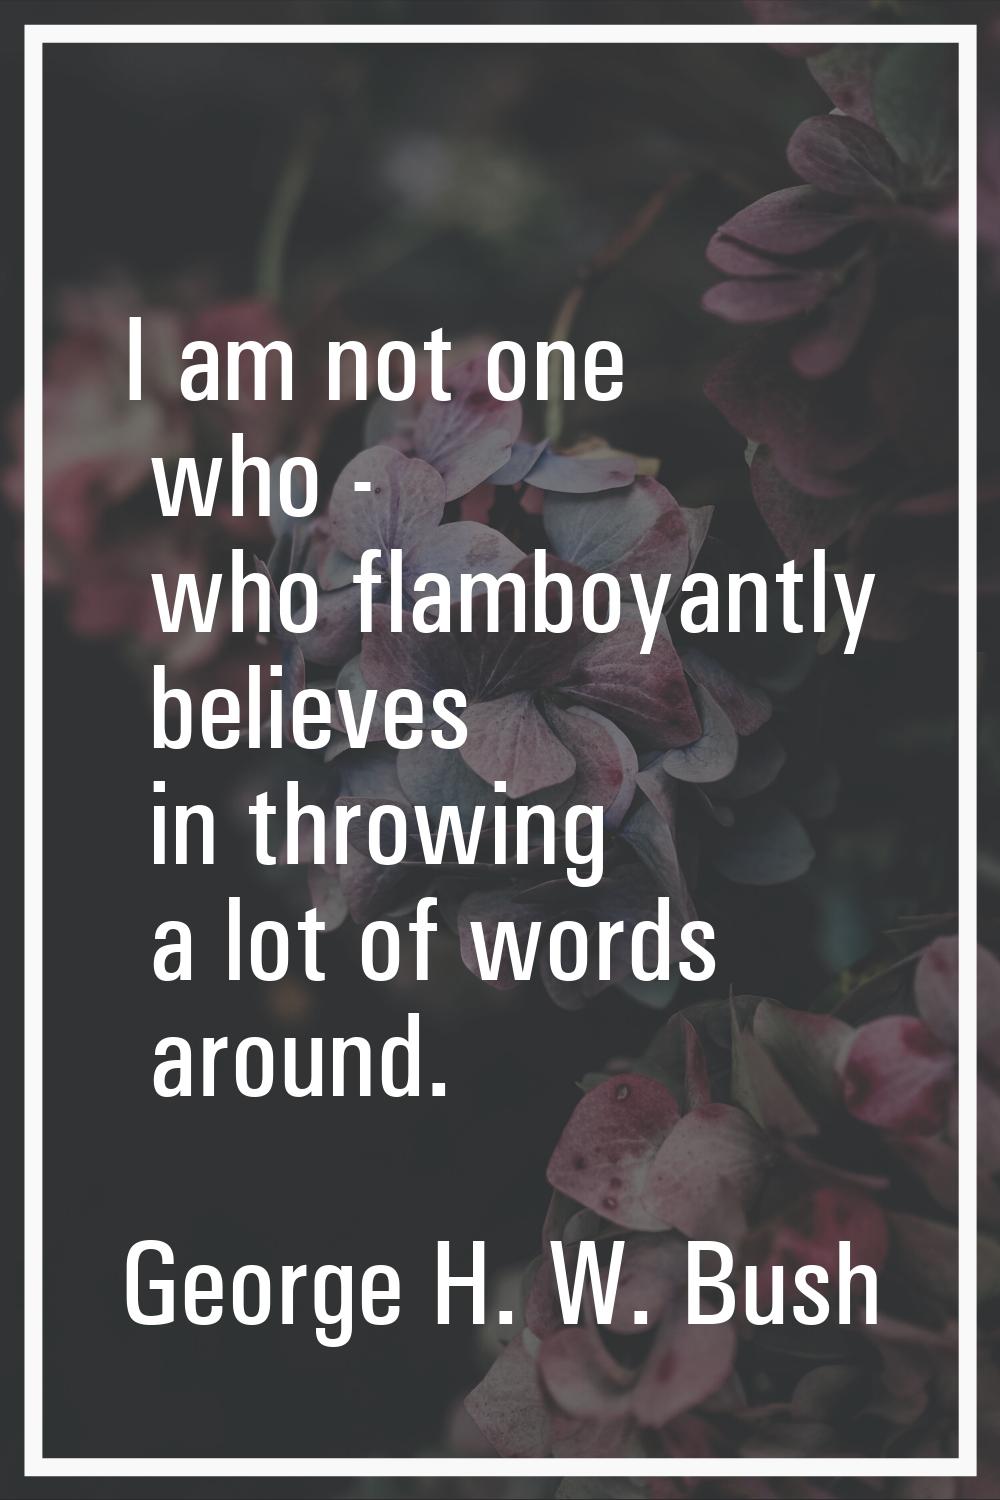 I am not one who - who flamboyantly believes in throwing a lot of words around.